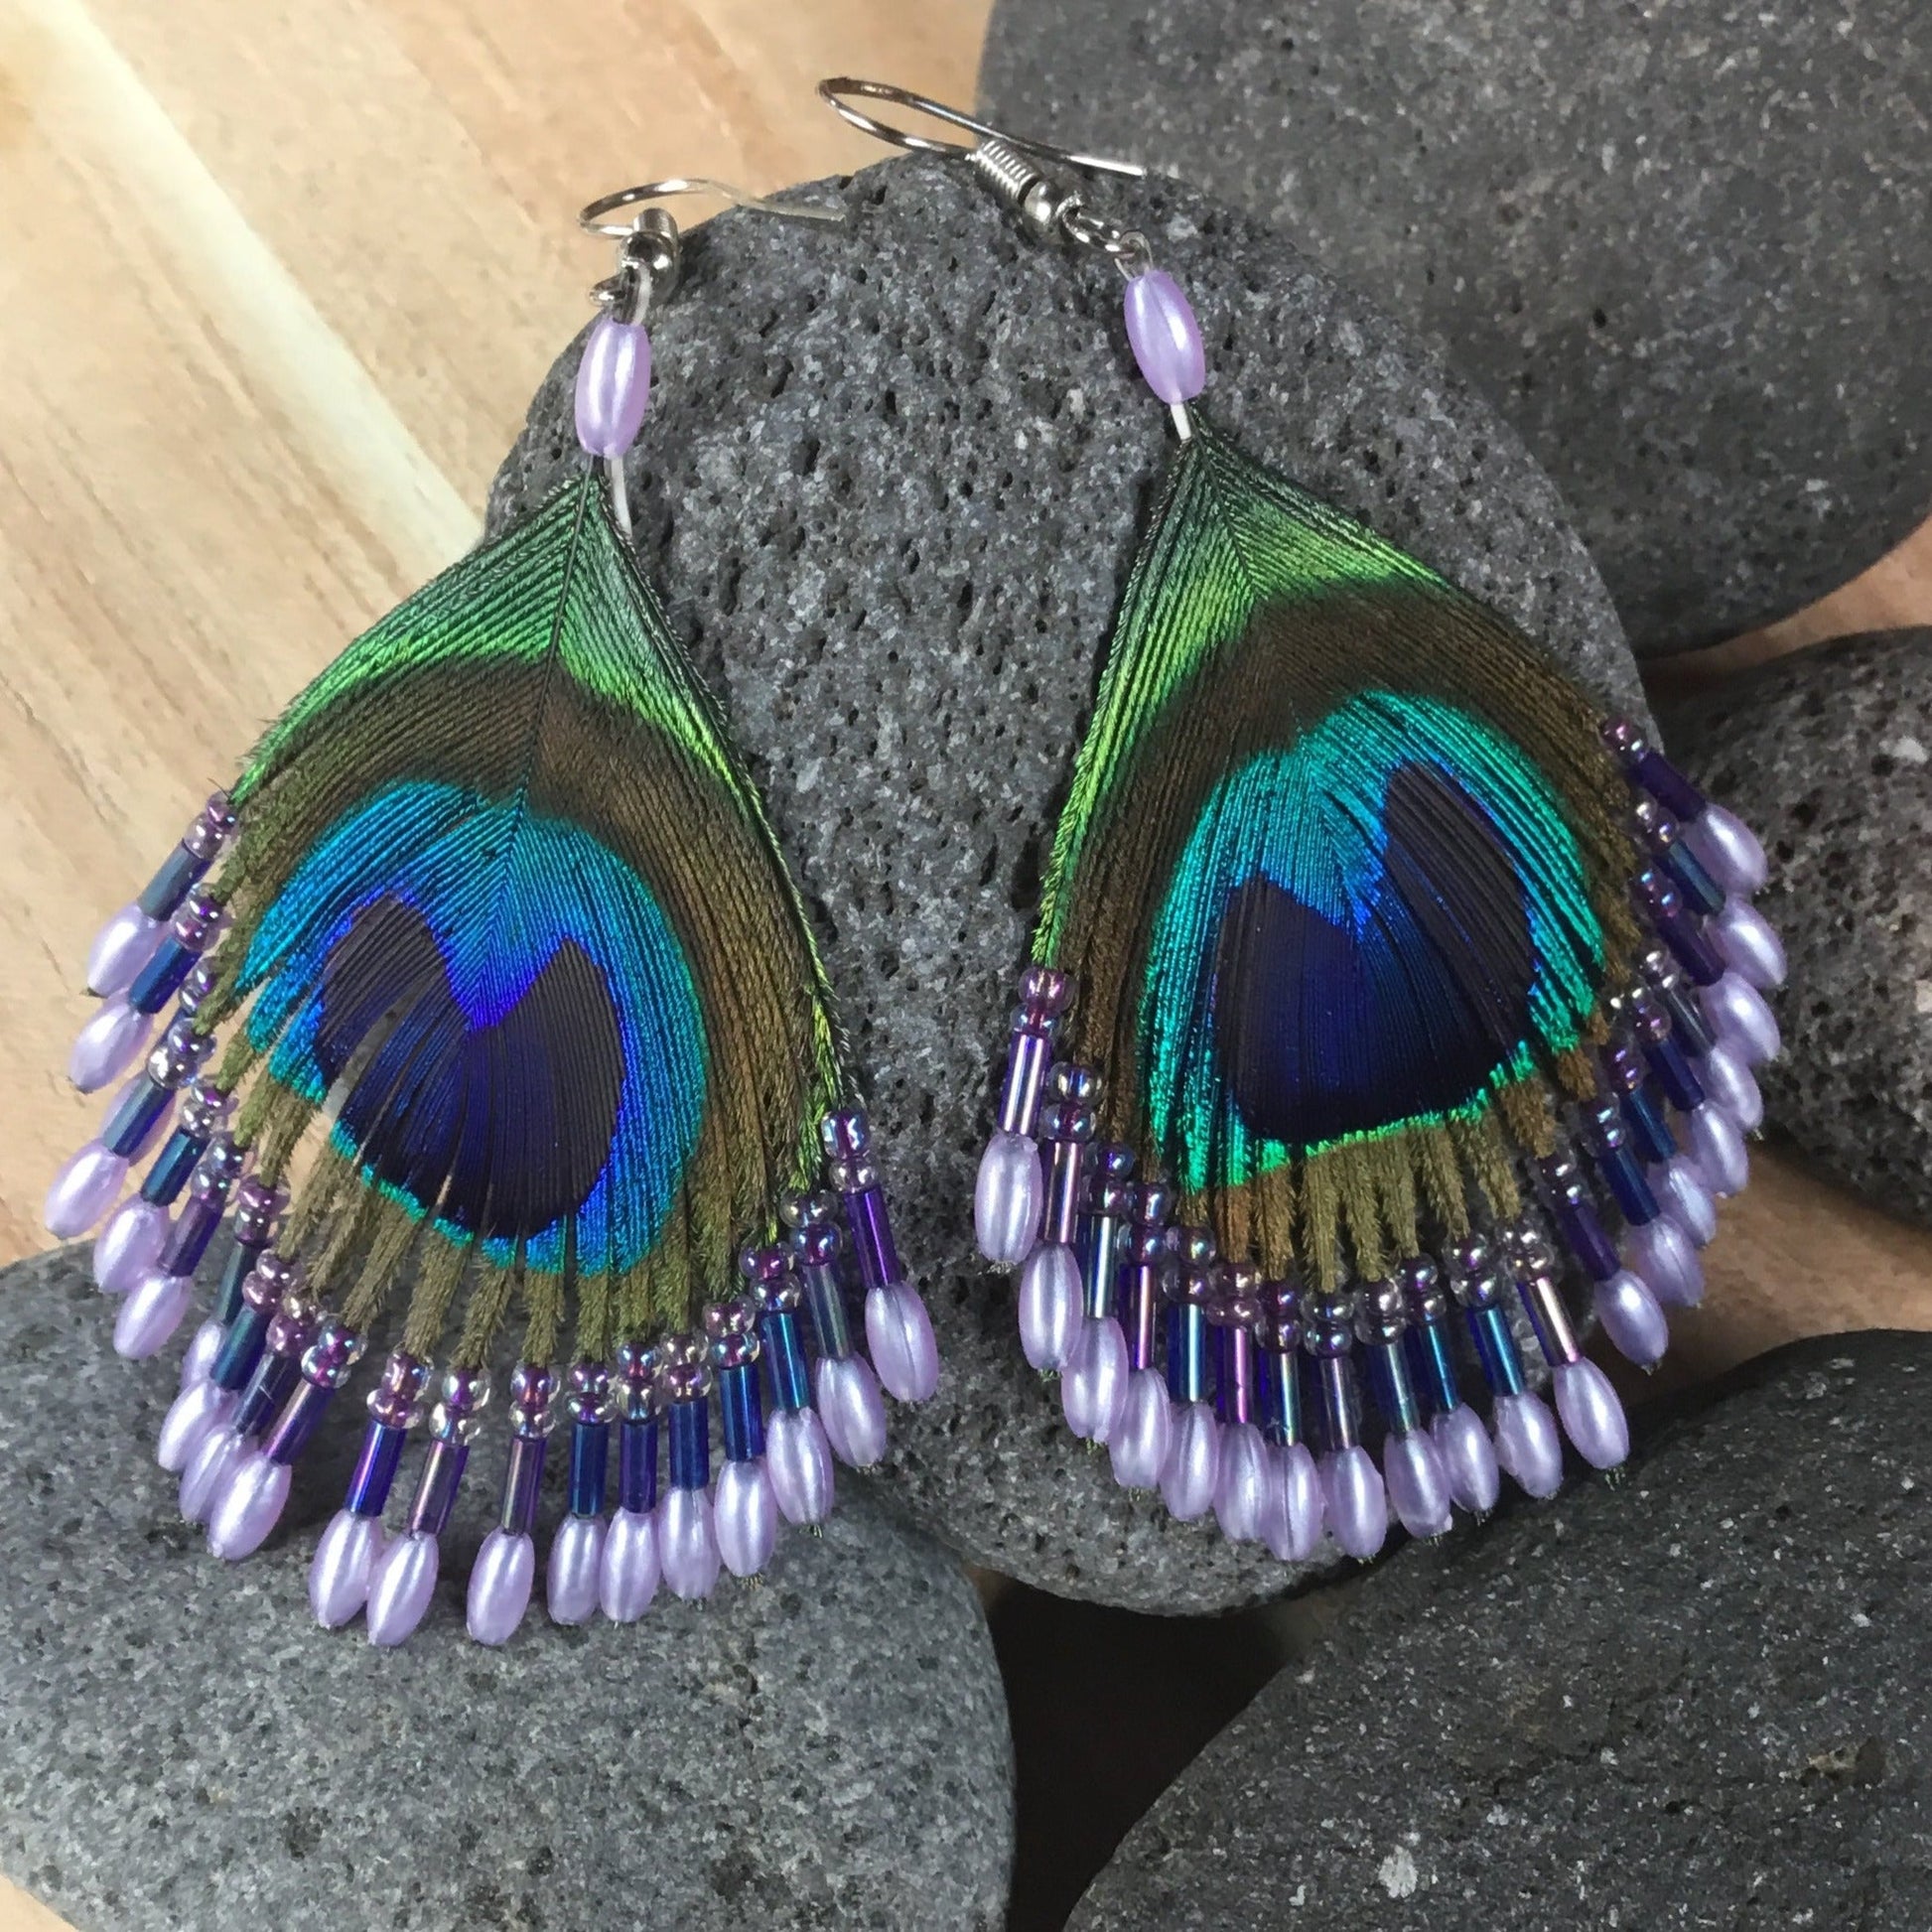 The meaning and symbolism of the peacock feather in peacock jewellery